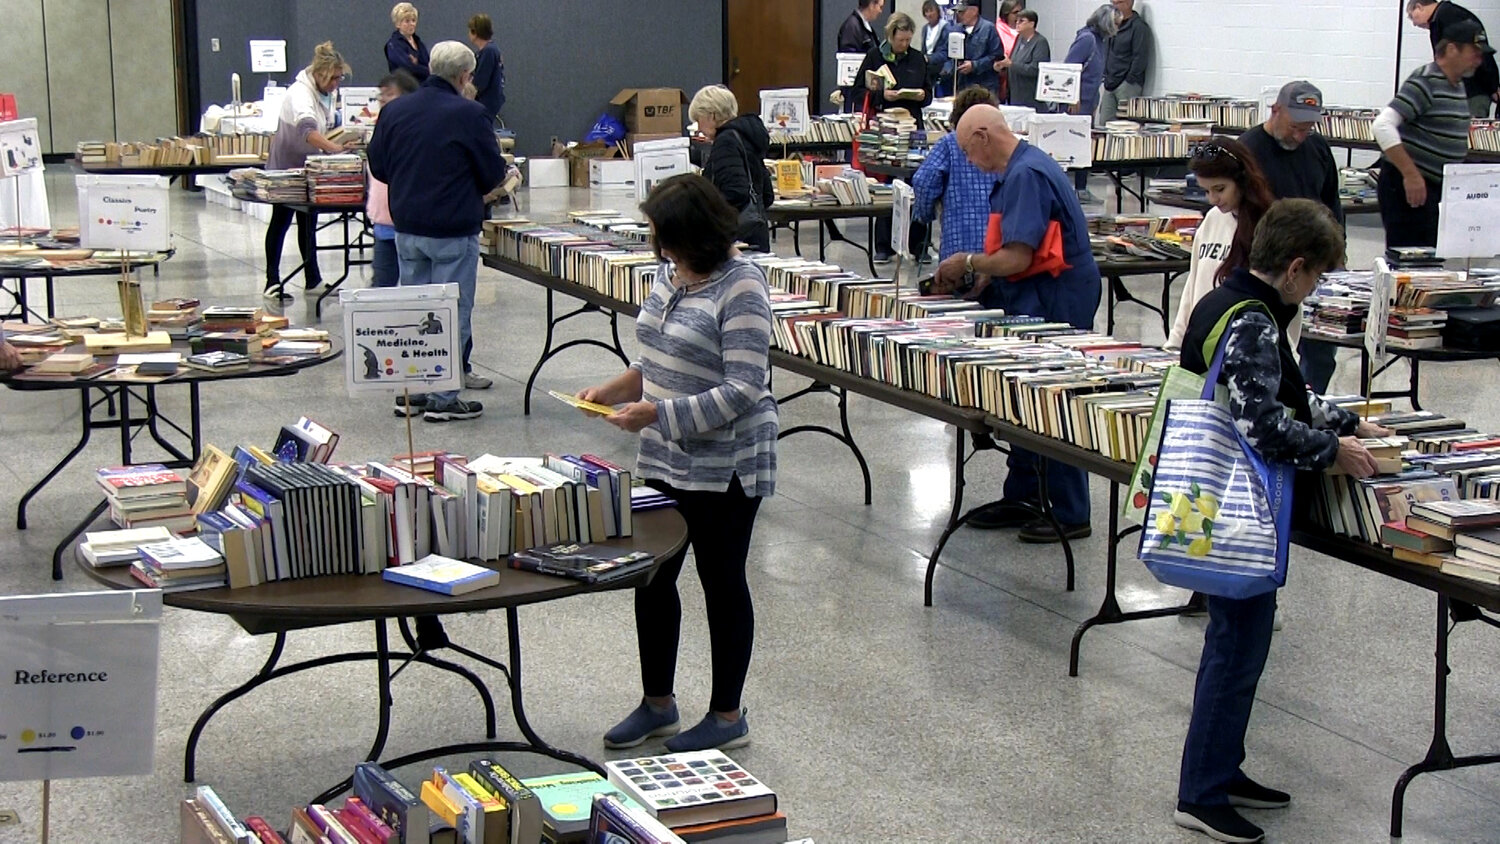 Attendees browse through the vast selection of books during the Friends of the Foley Library Book Sale. Mark your calendars for the 2024 sale, happening on Feb. 8, 9, and 10 at the Foley Civic Center.